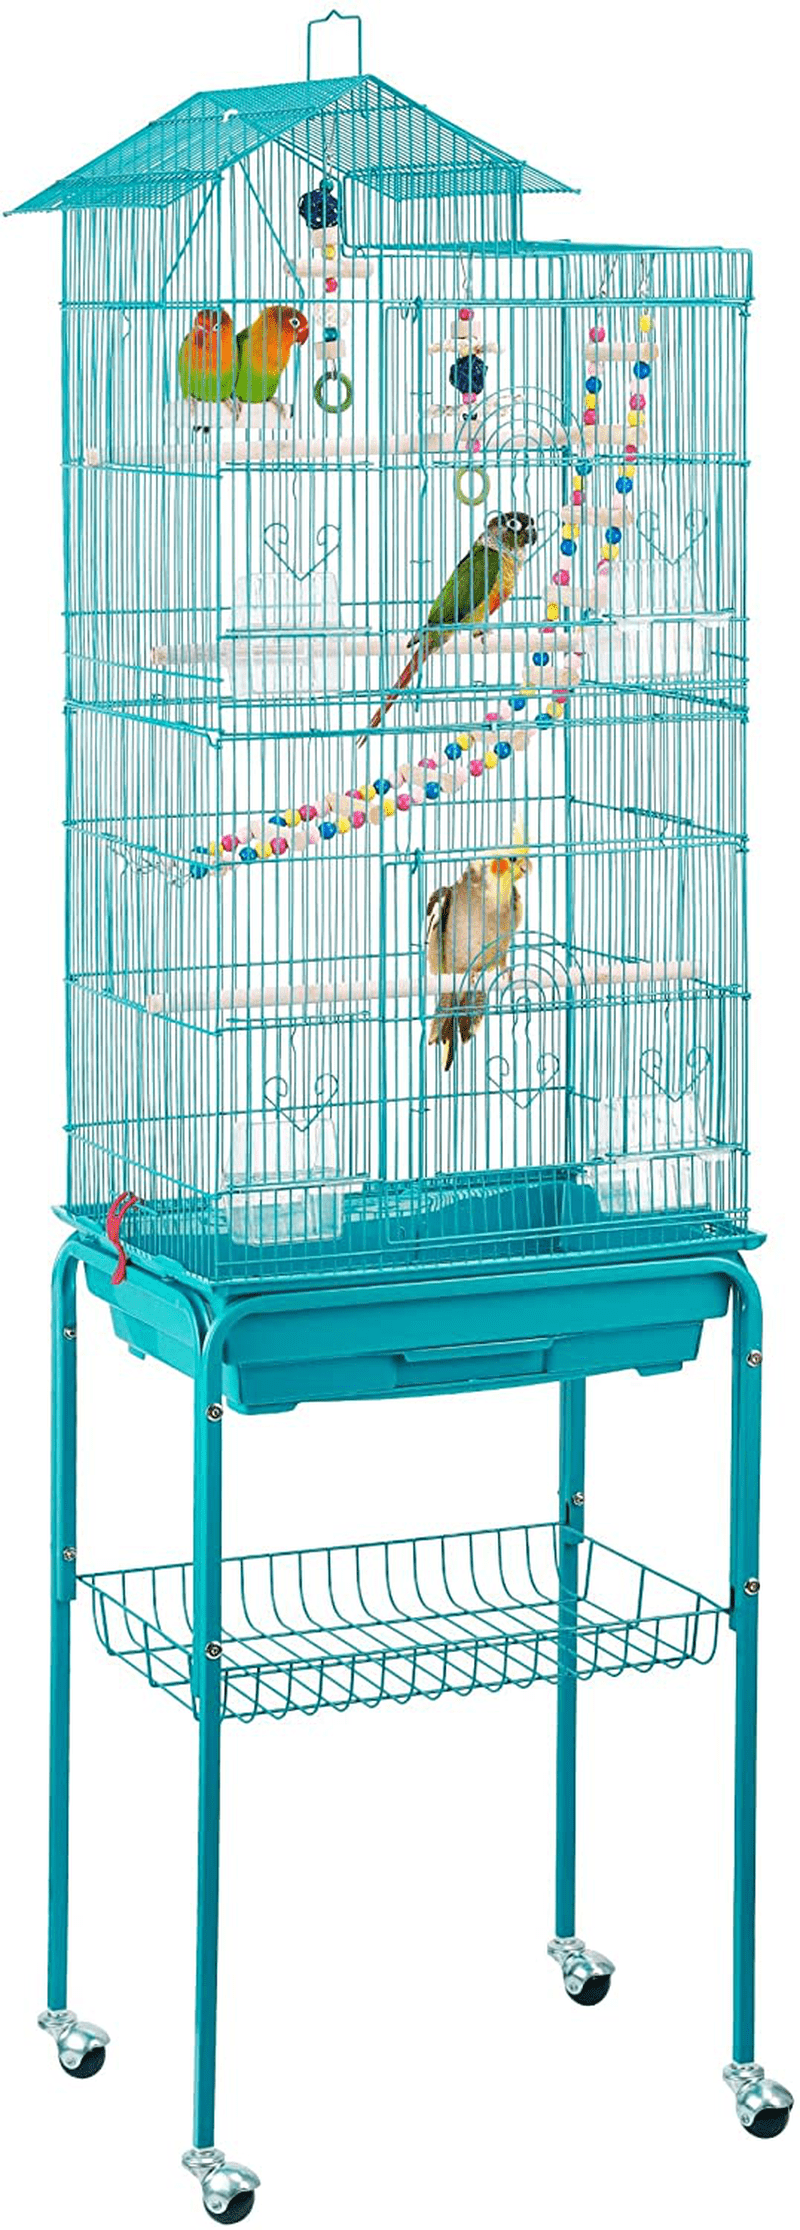 Yaheetech 62.4'' Roof Top Bird Cage Wrought Iron Rolling Parrot Cage for Medium Small Birds Budgies Cockatiels Parakeets Animals & Pet Supplies > Pet Supplies > Bird Supplies > Bird Cage Accessories Yaheetech Teal Blue  